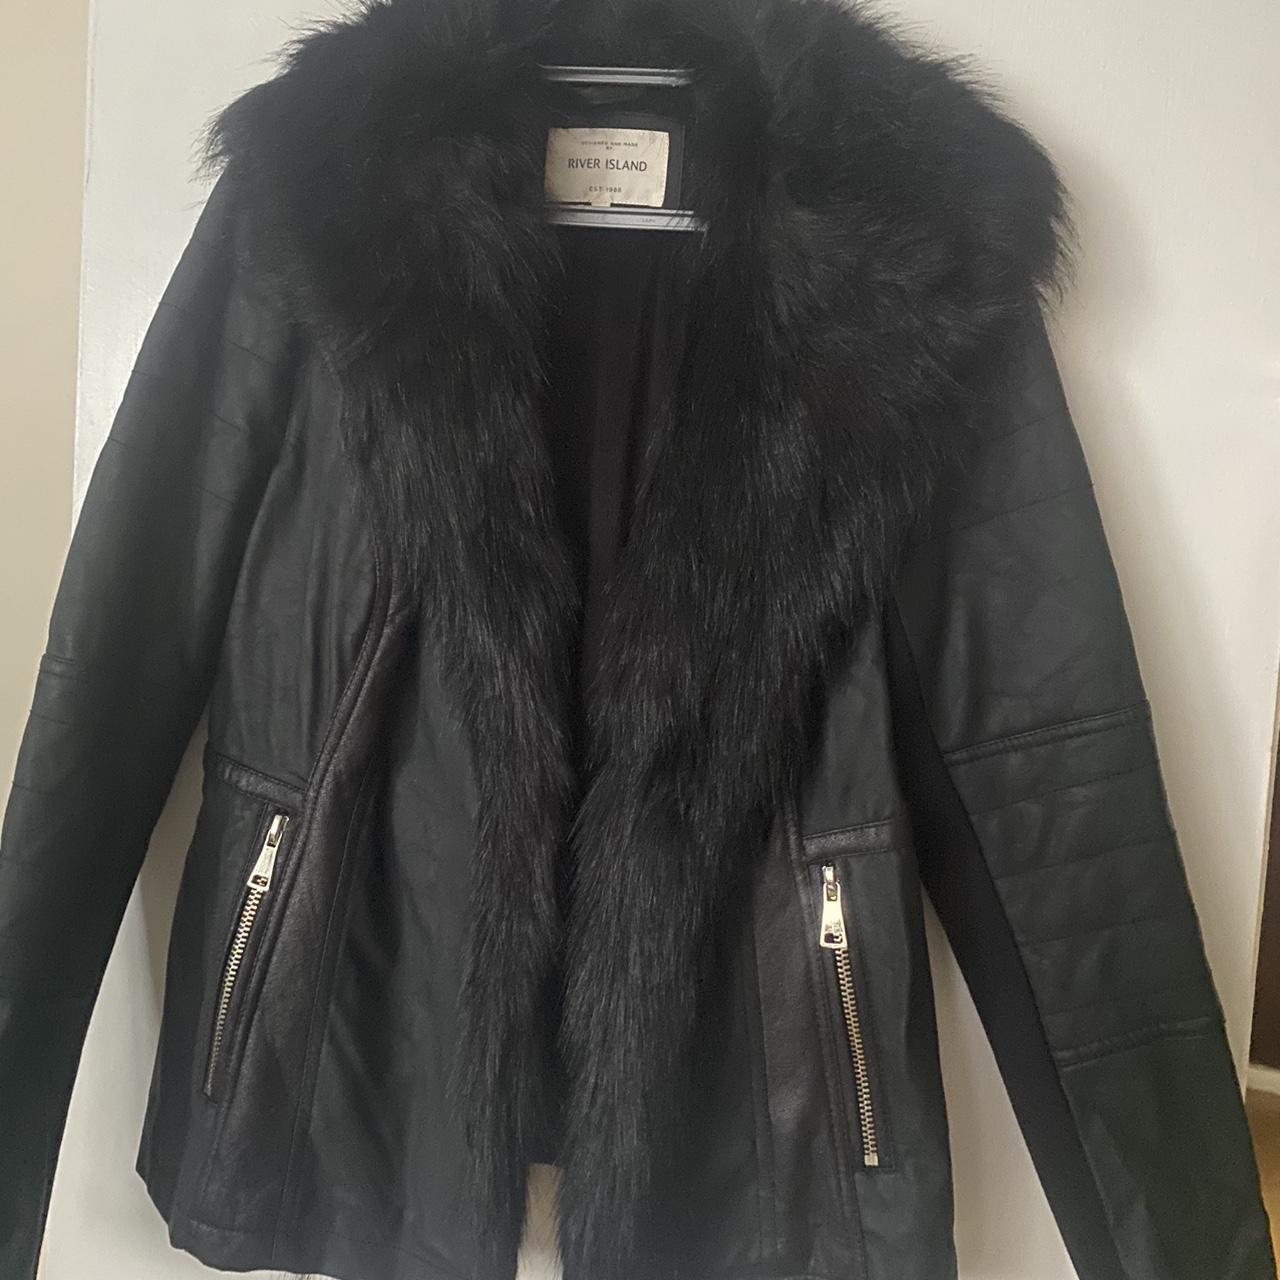 Womens black river island faux leather jacket with... - Depop